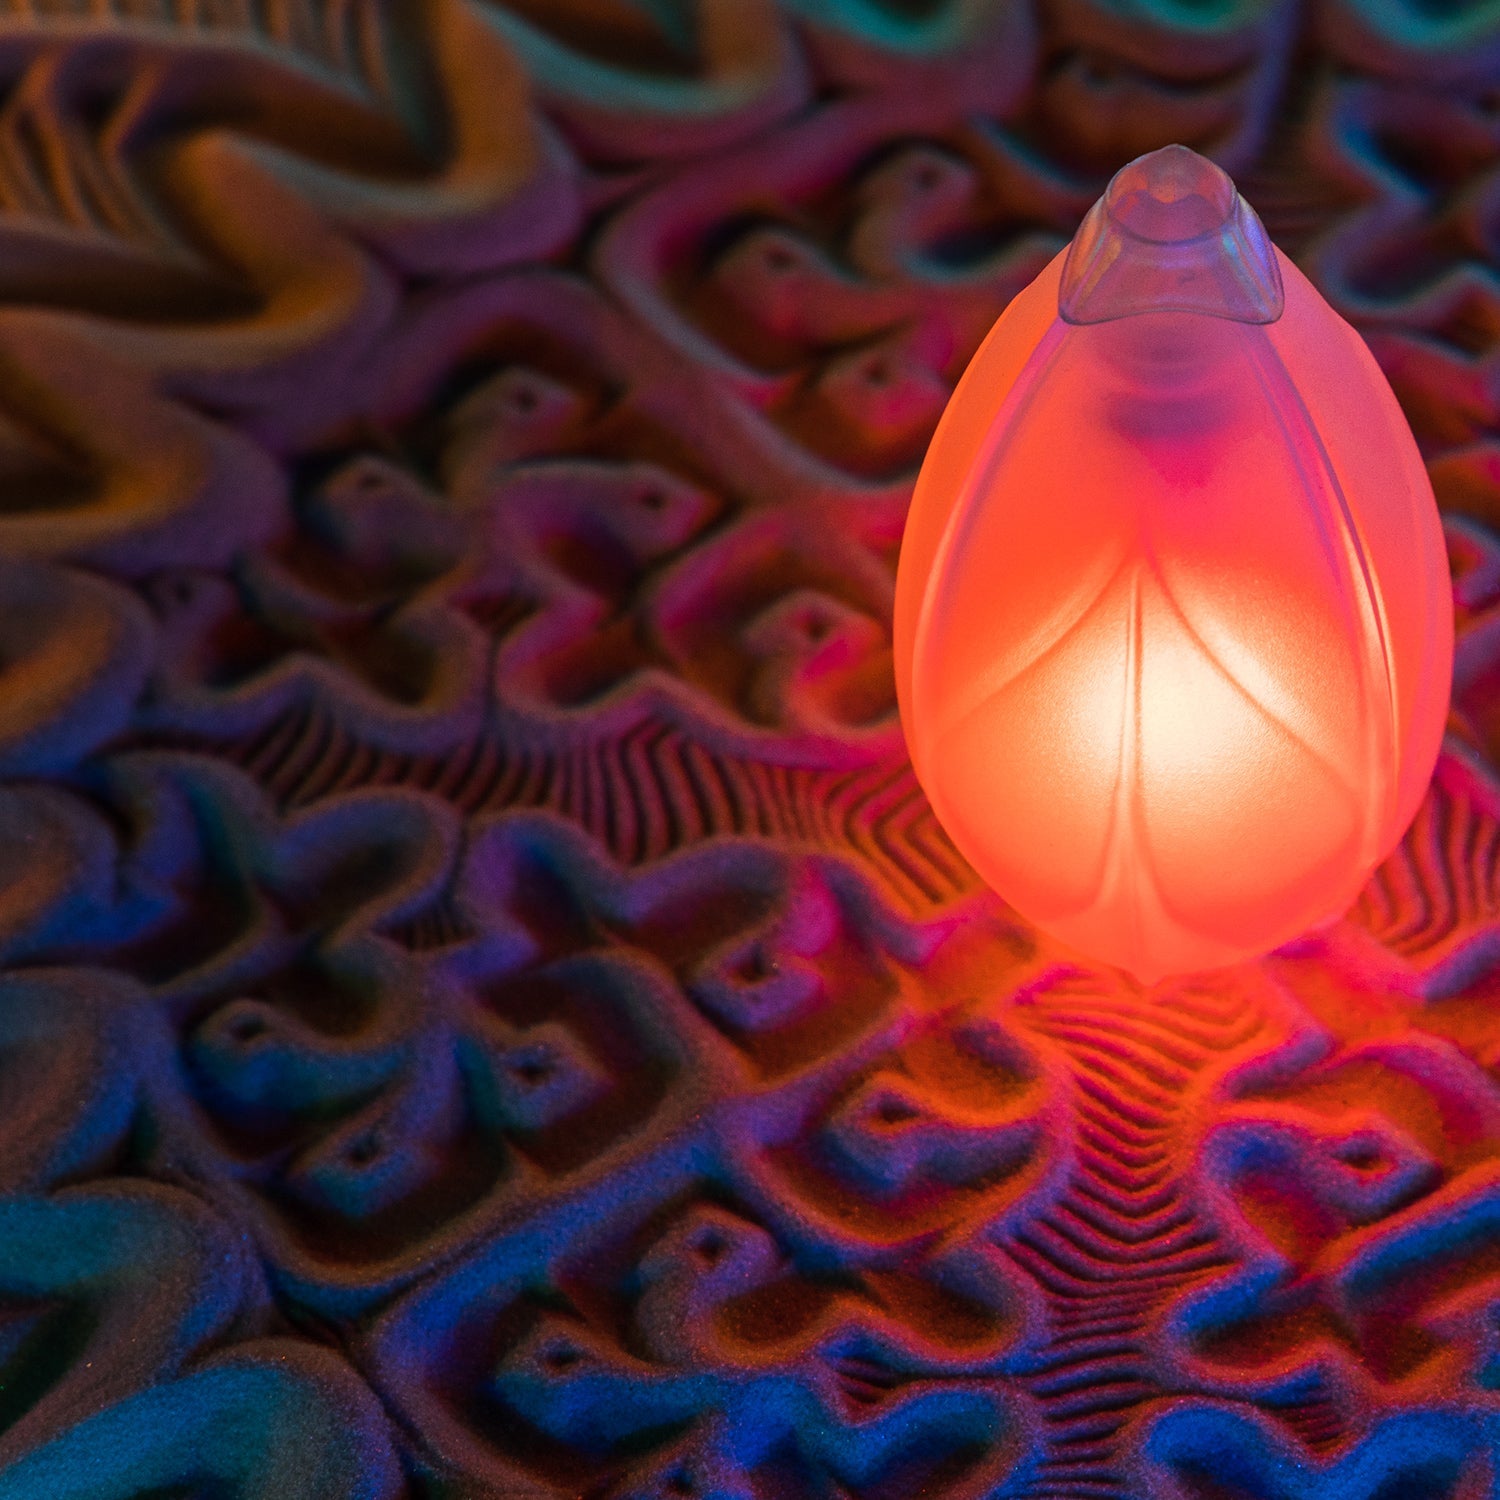 A single Flowtoys Podpoi v2 glowing softly on a psychedelic patterned rug